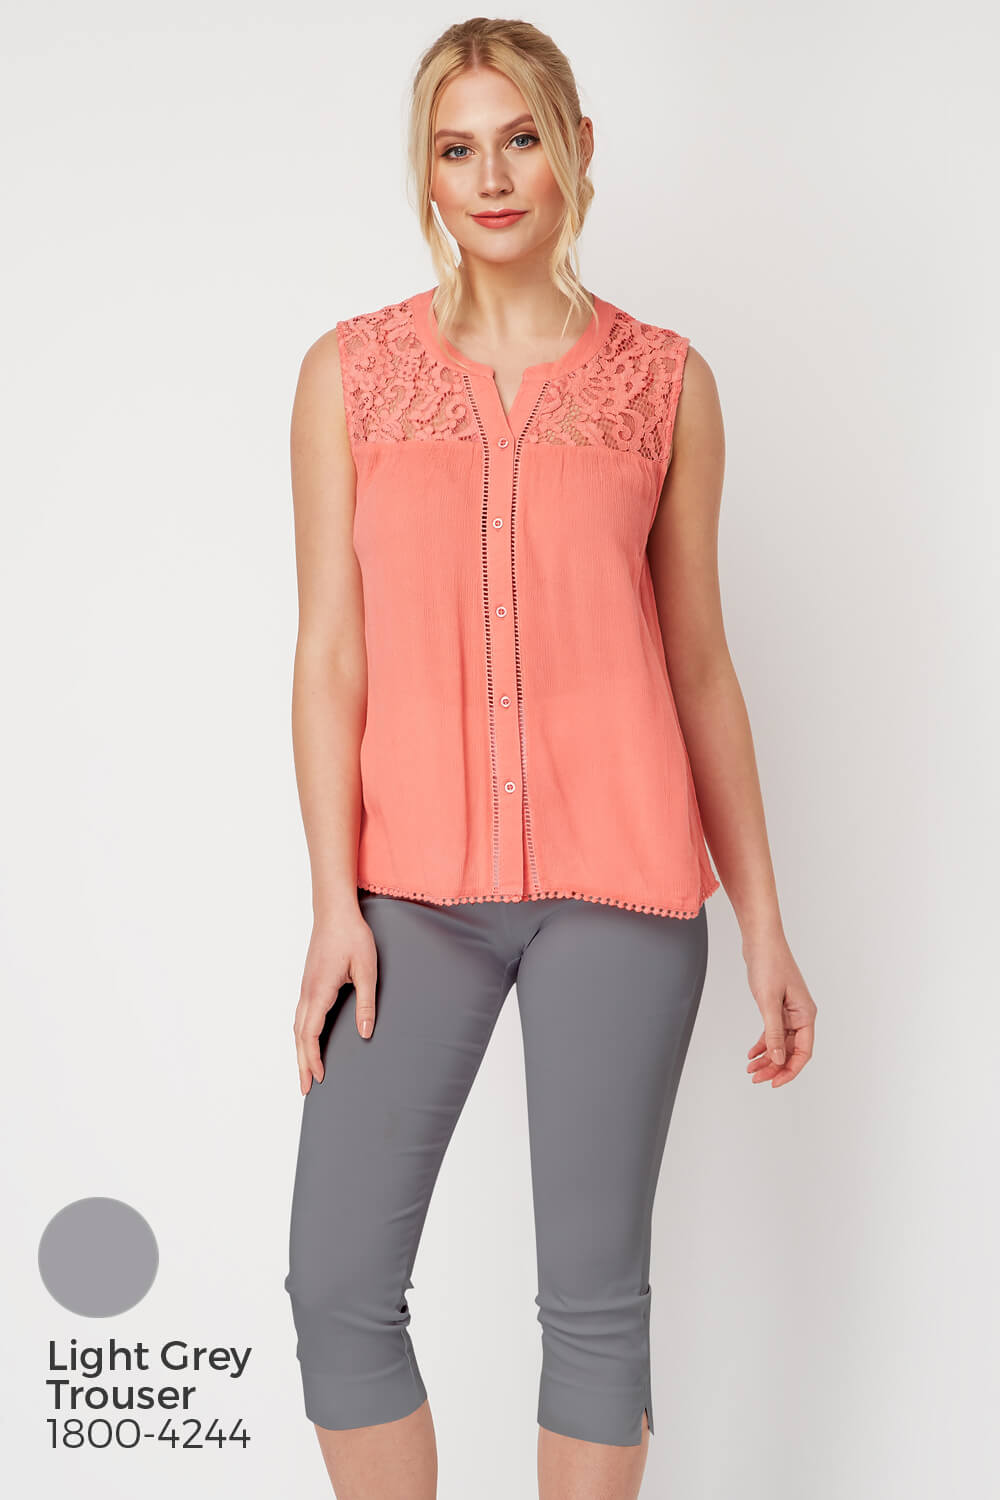 CORAL Lace Insert Button Up Blouse, Image 8 of 8